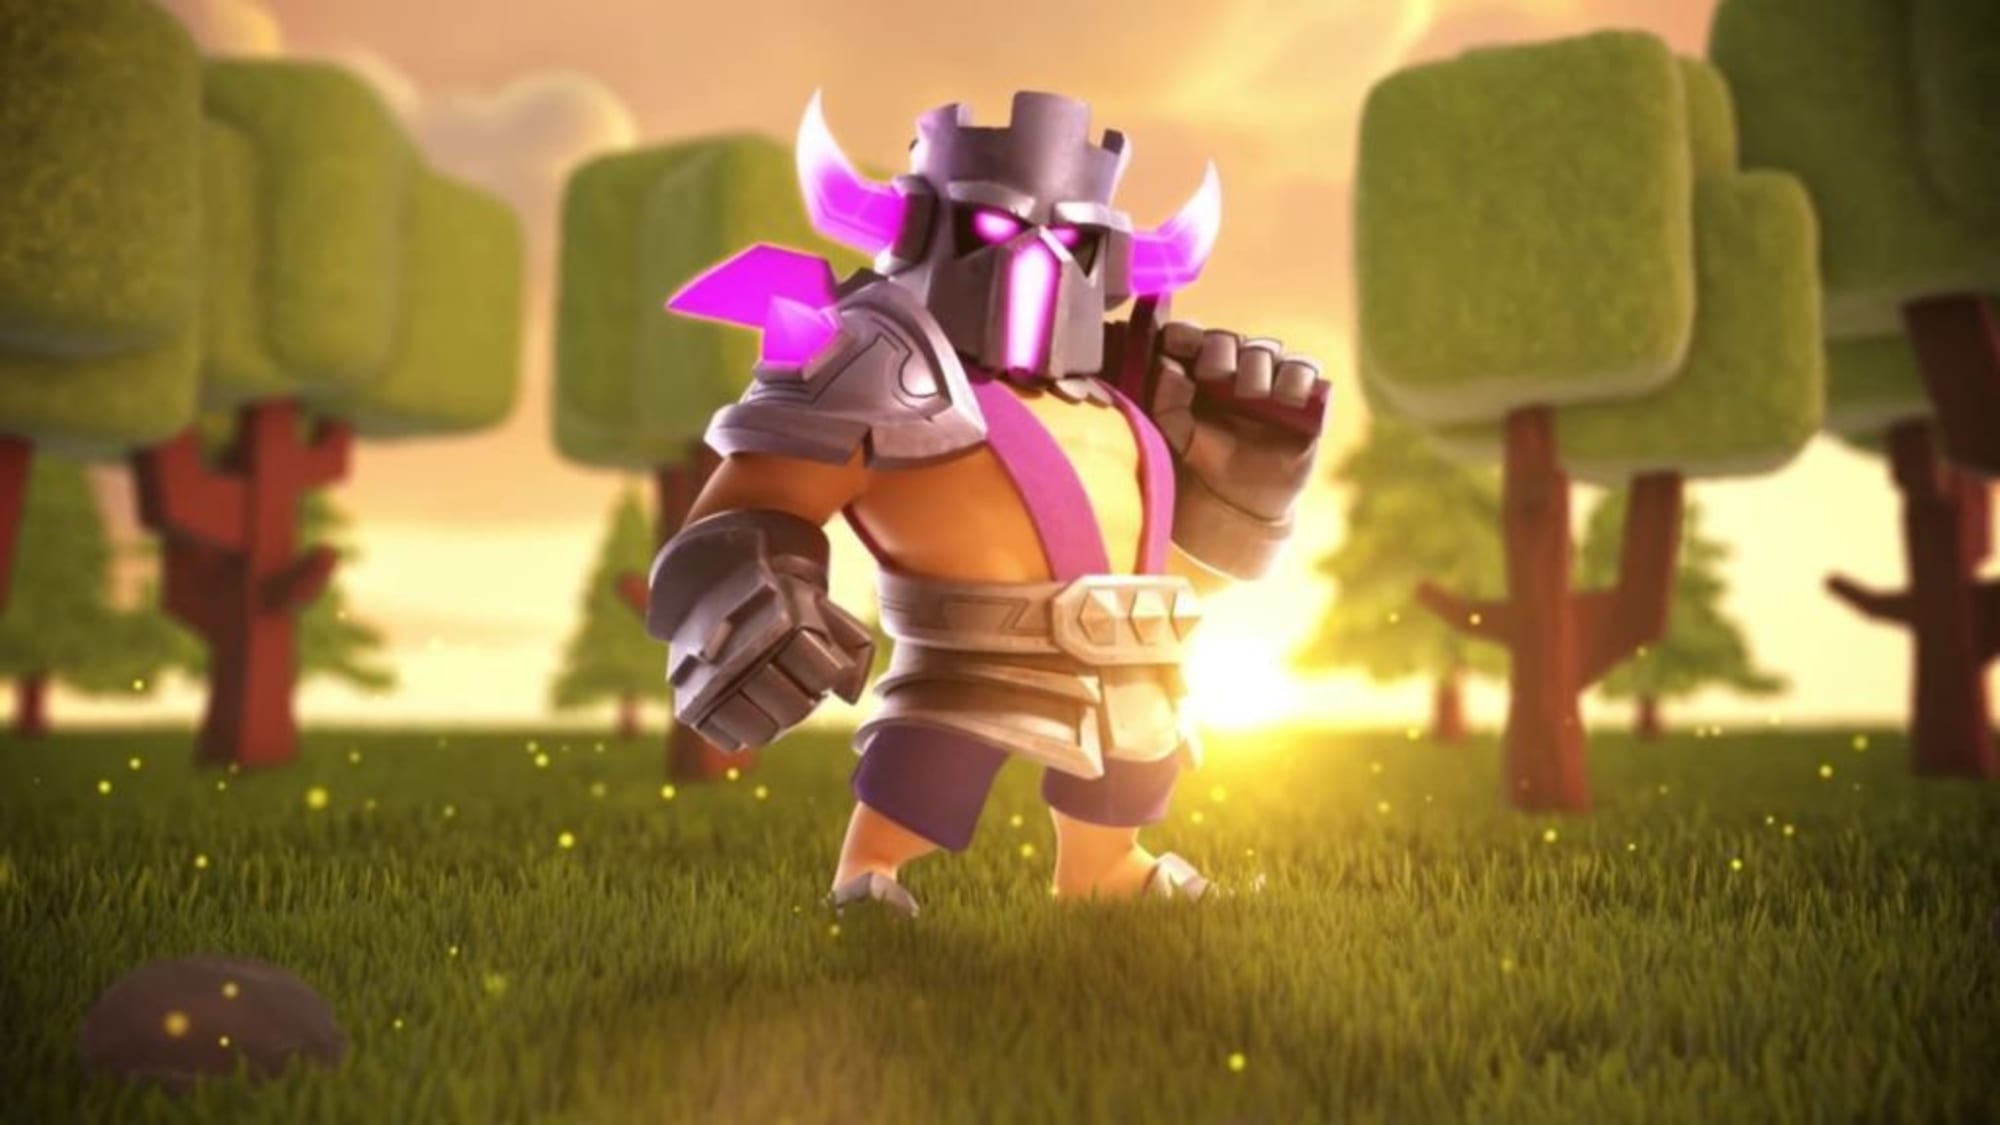 Clash Of Clans June Season Challenges Now Live With P E K K A King Skin